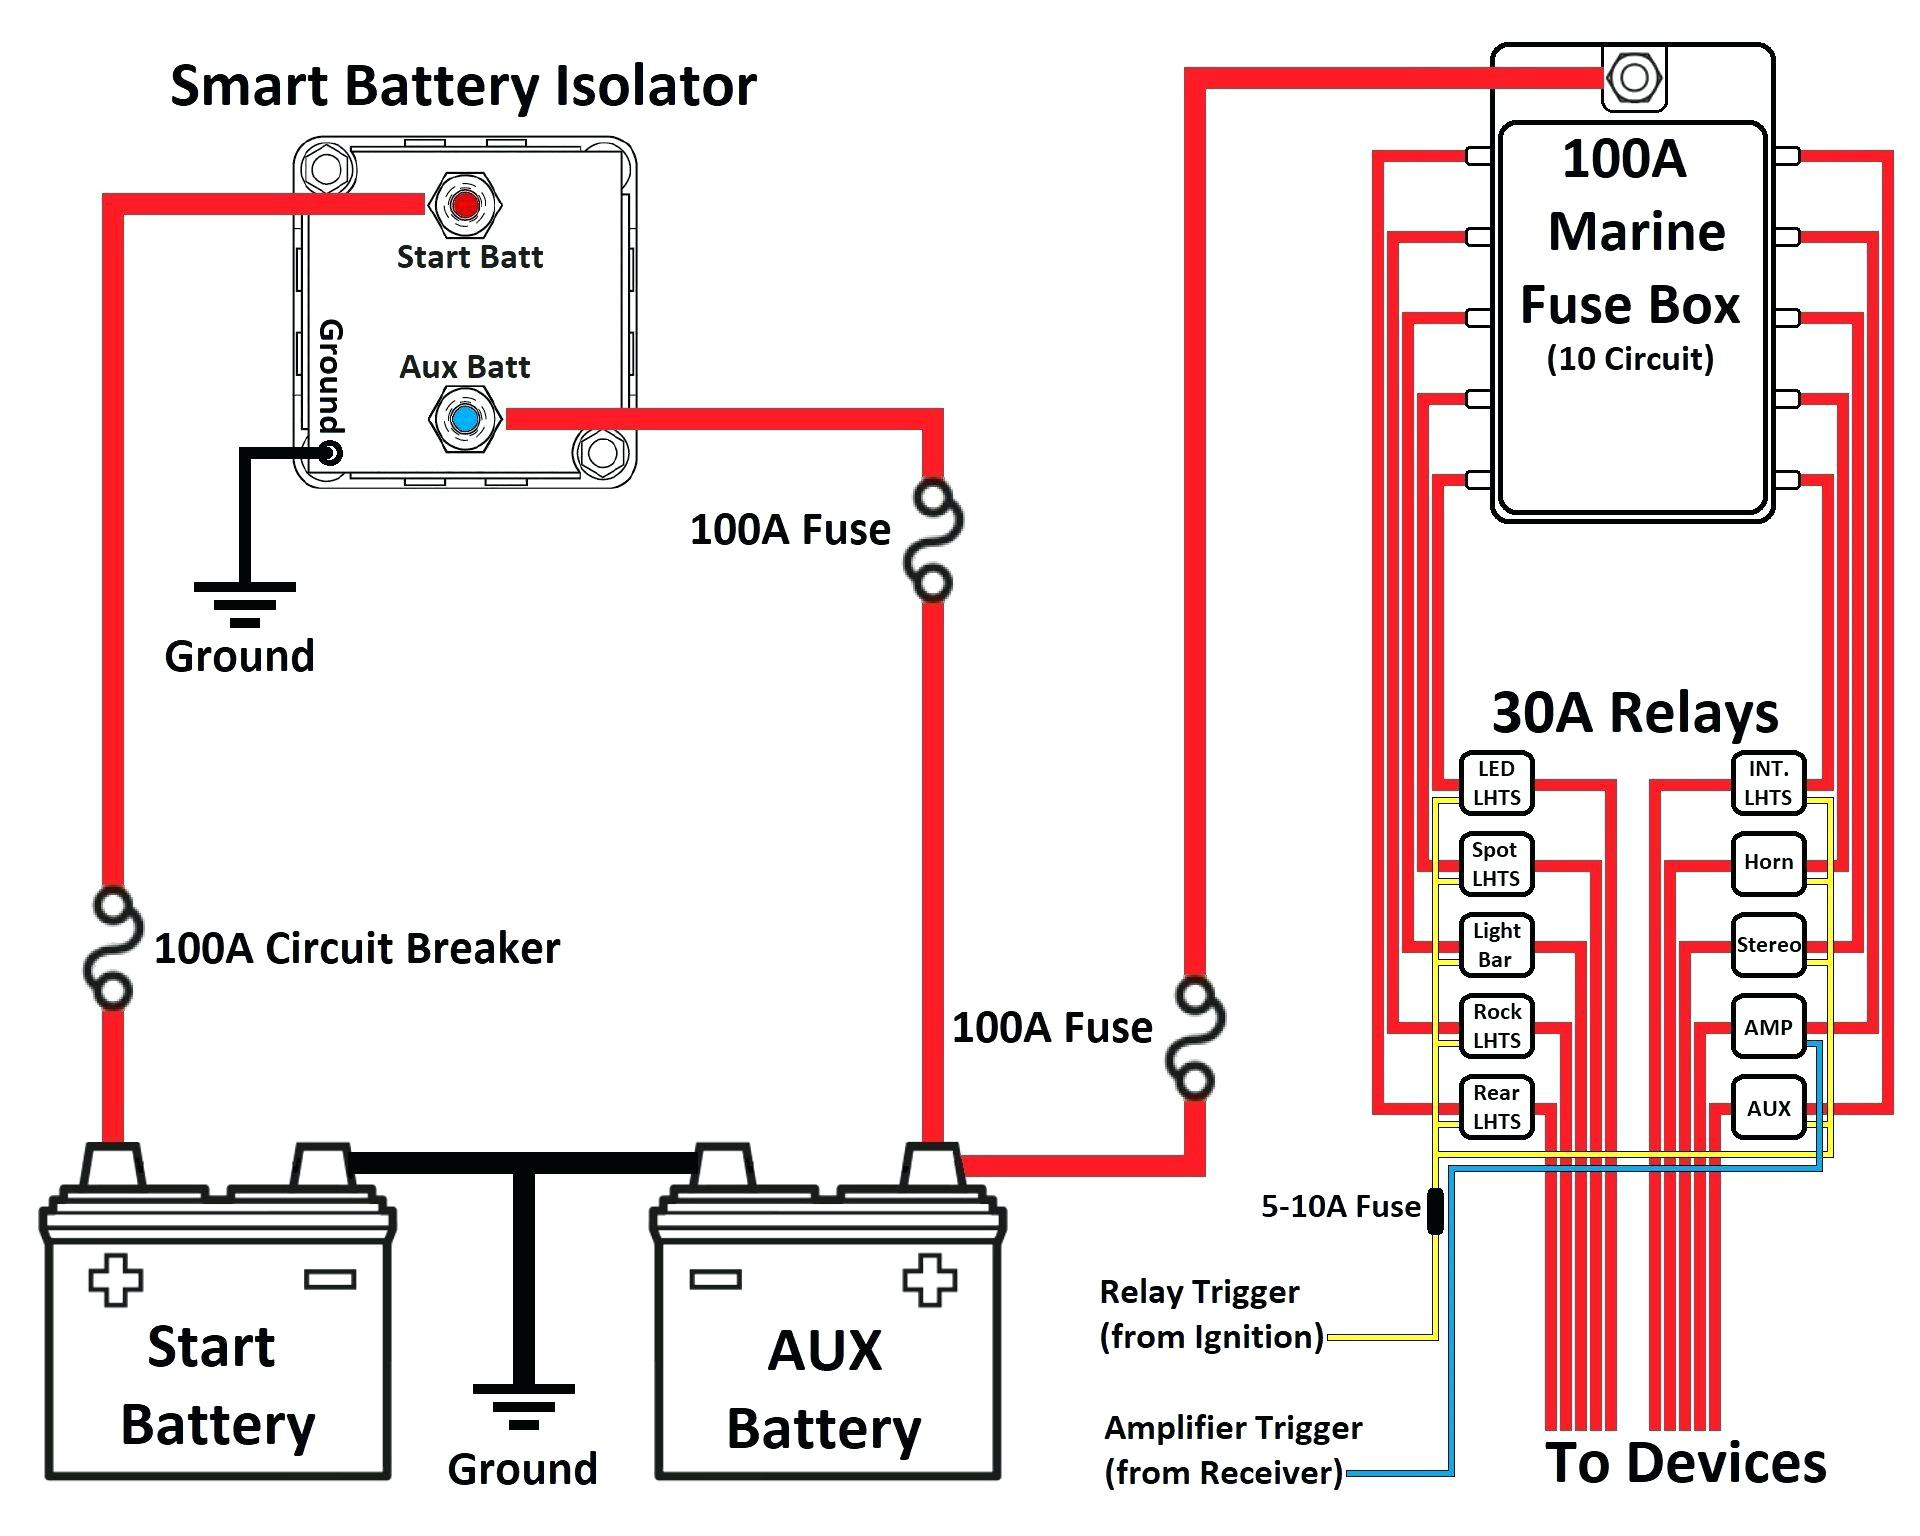 Wiring Diagram Typical Battery Isolator Circuits Single - Today - Boat Battery Switch Wiring Diagram